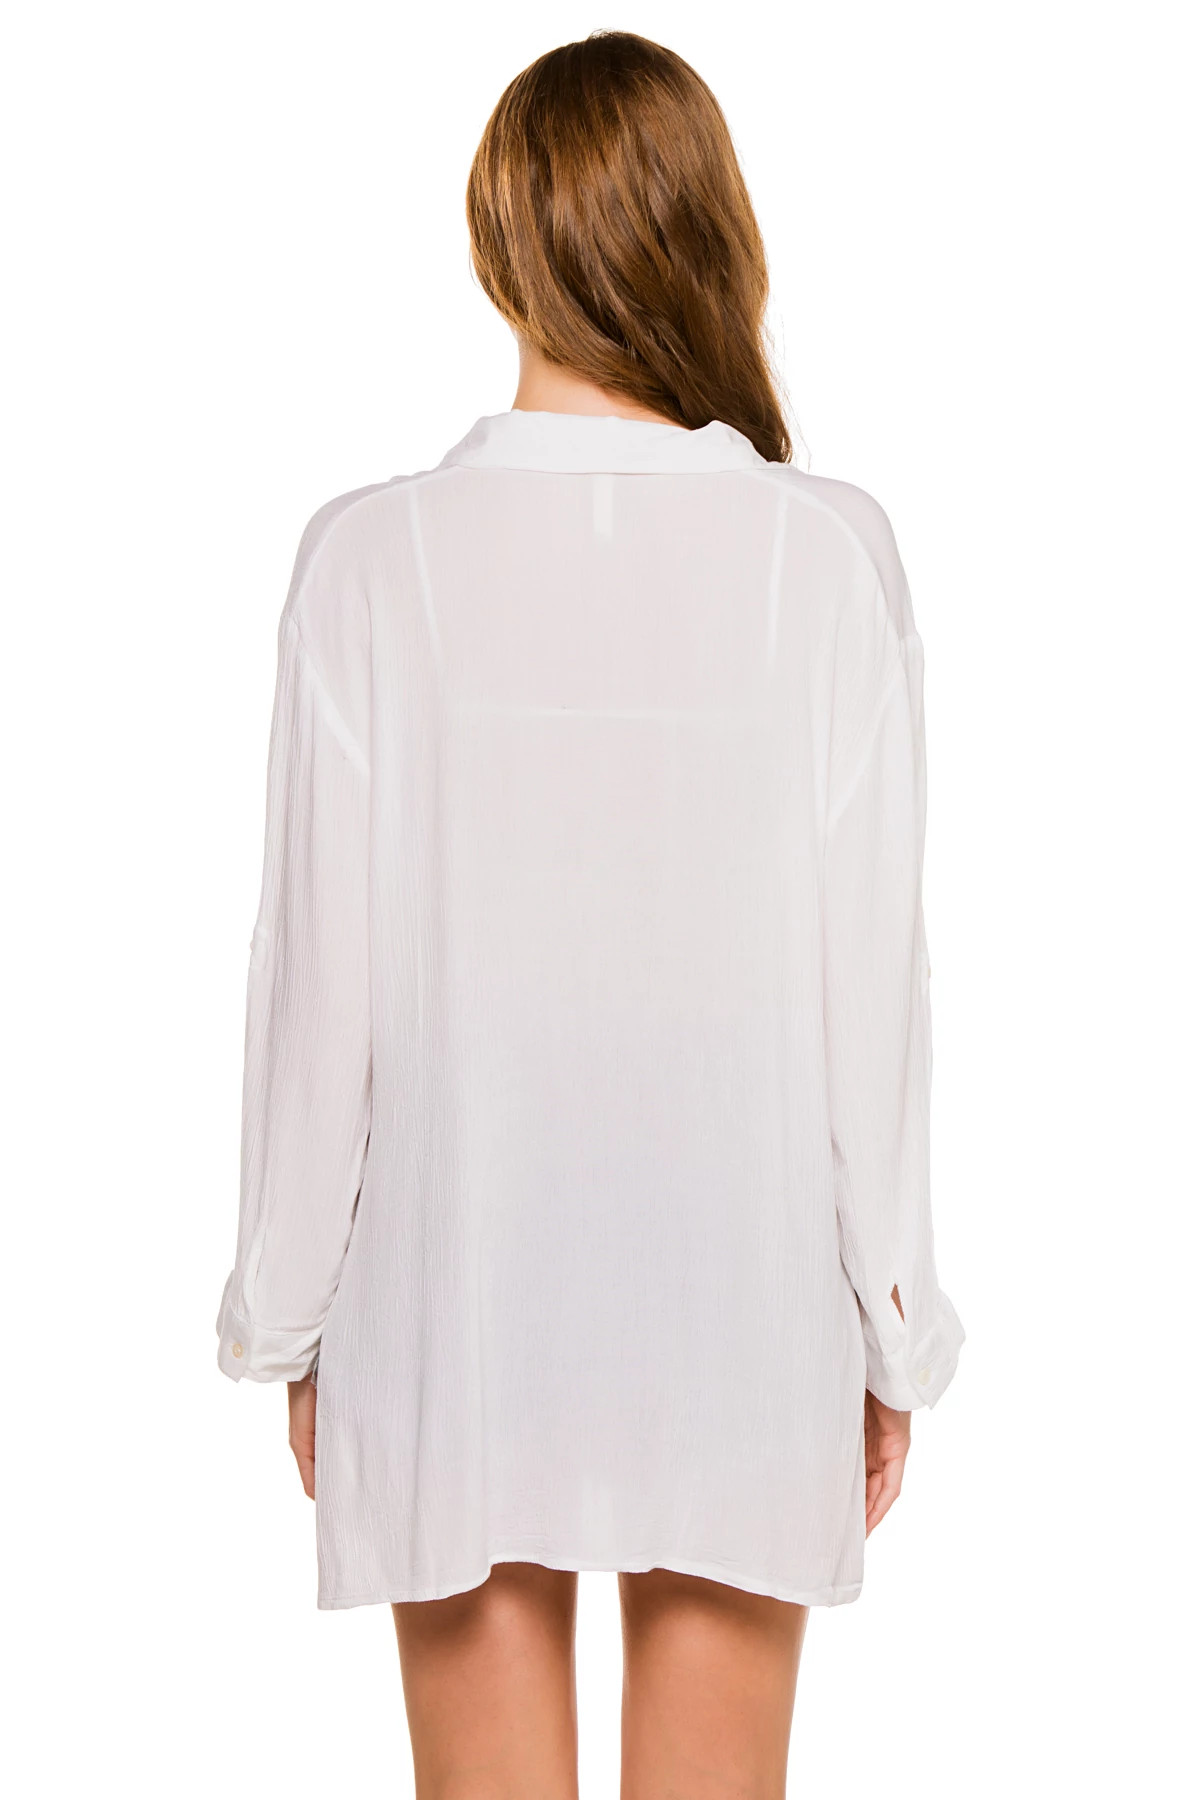 WHITE Button Down Shirt Dress image number 2